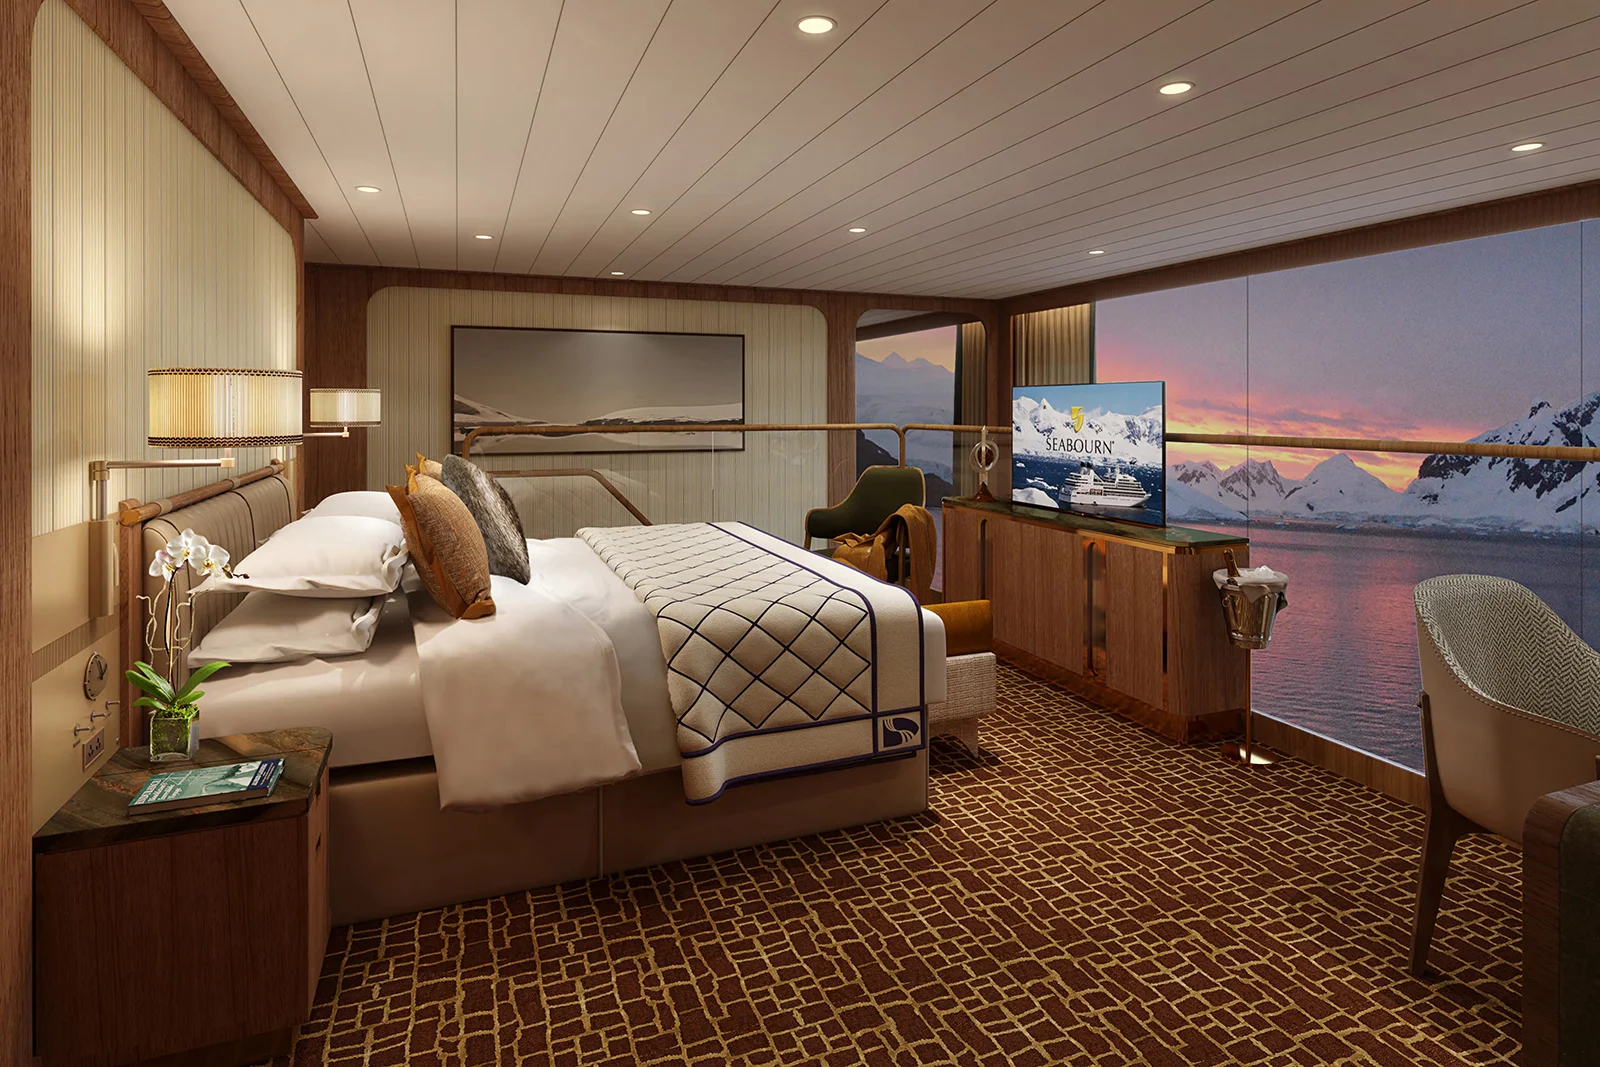 The best manual for picking a cabin on a cruise ship